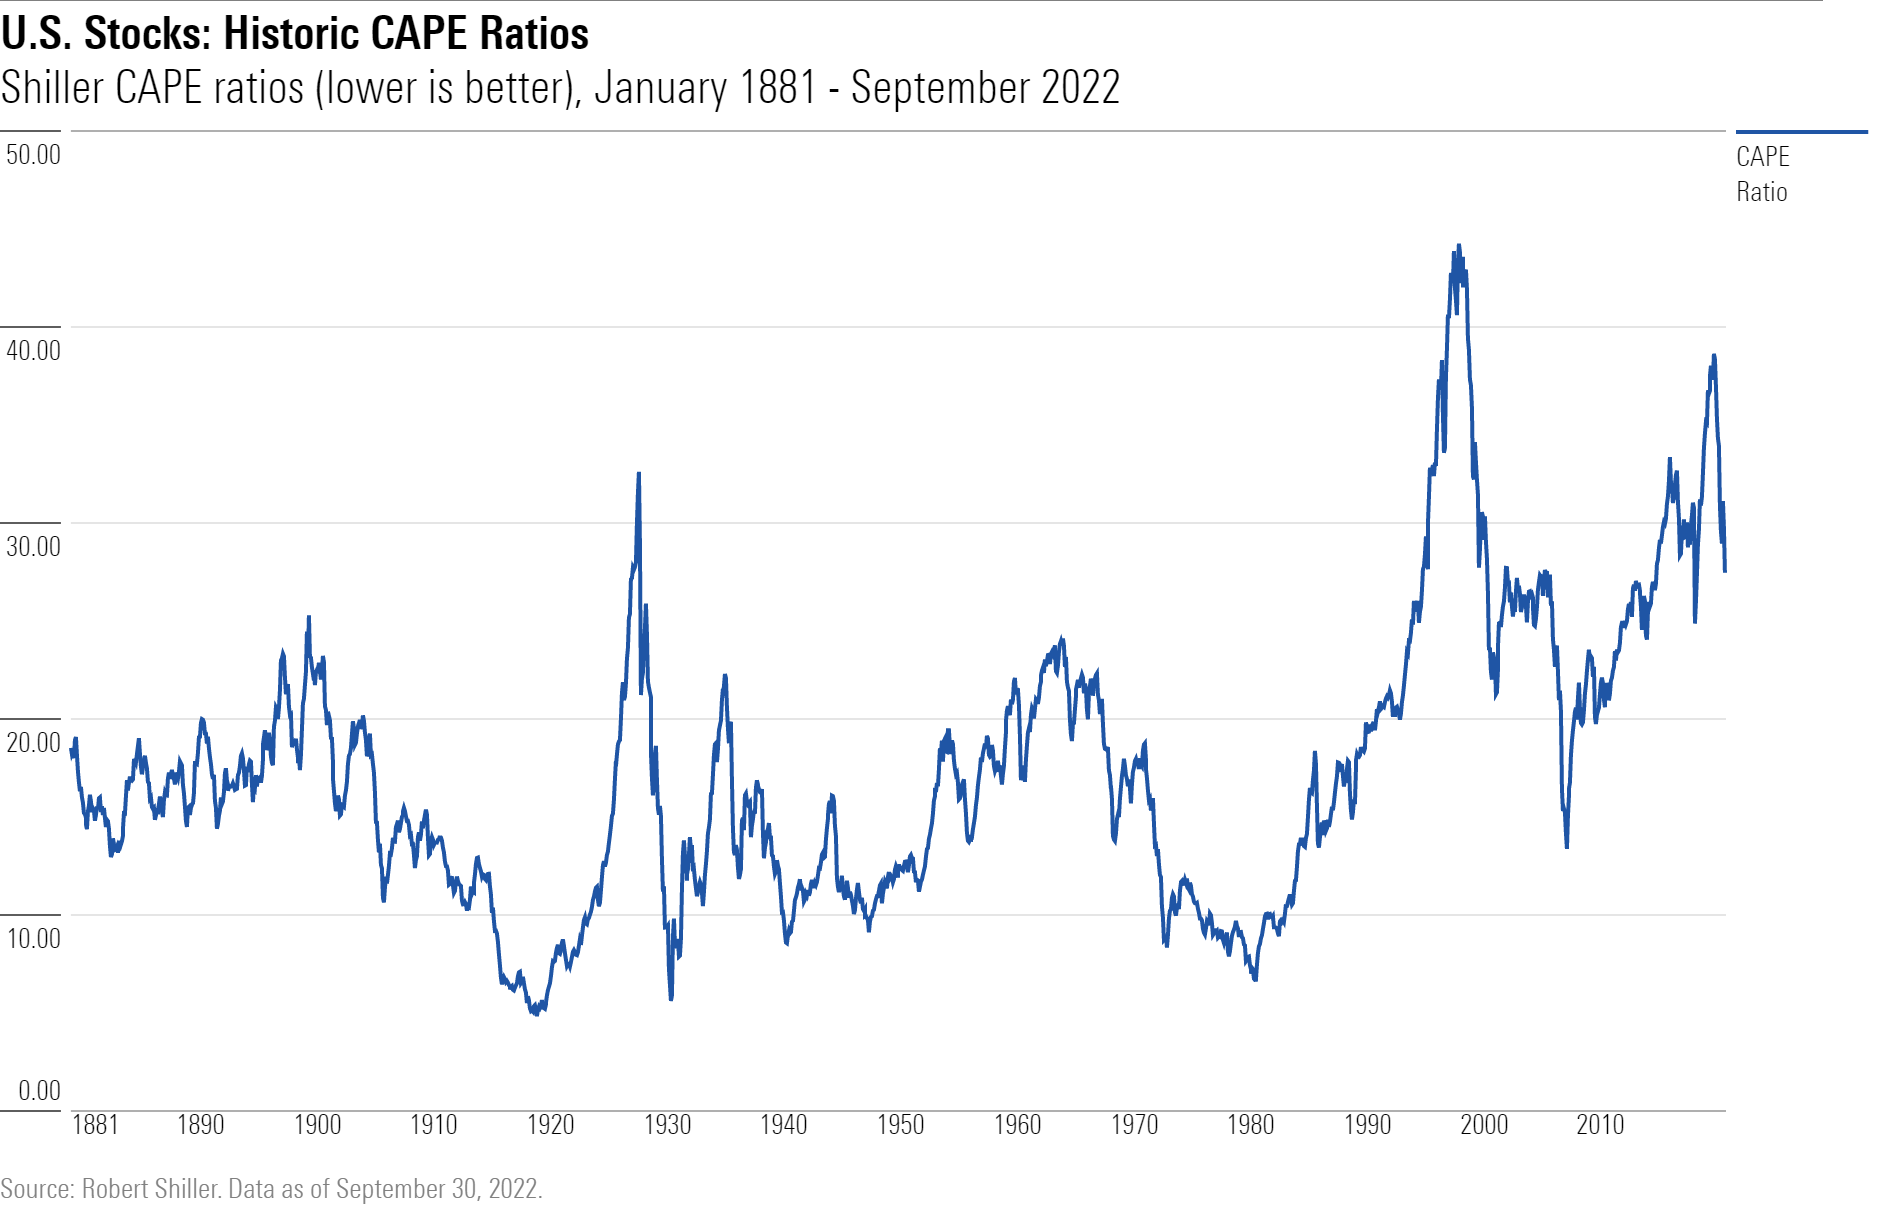 Line graph of historic CAPE ratio yields for U.S. Stocks